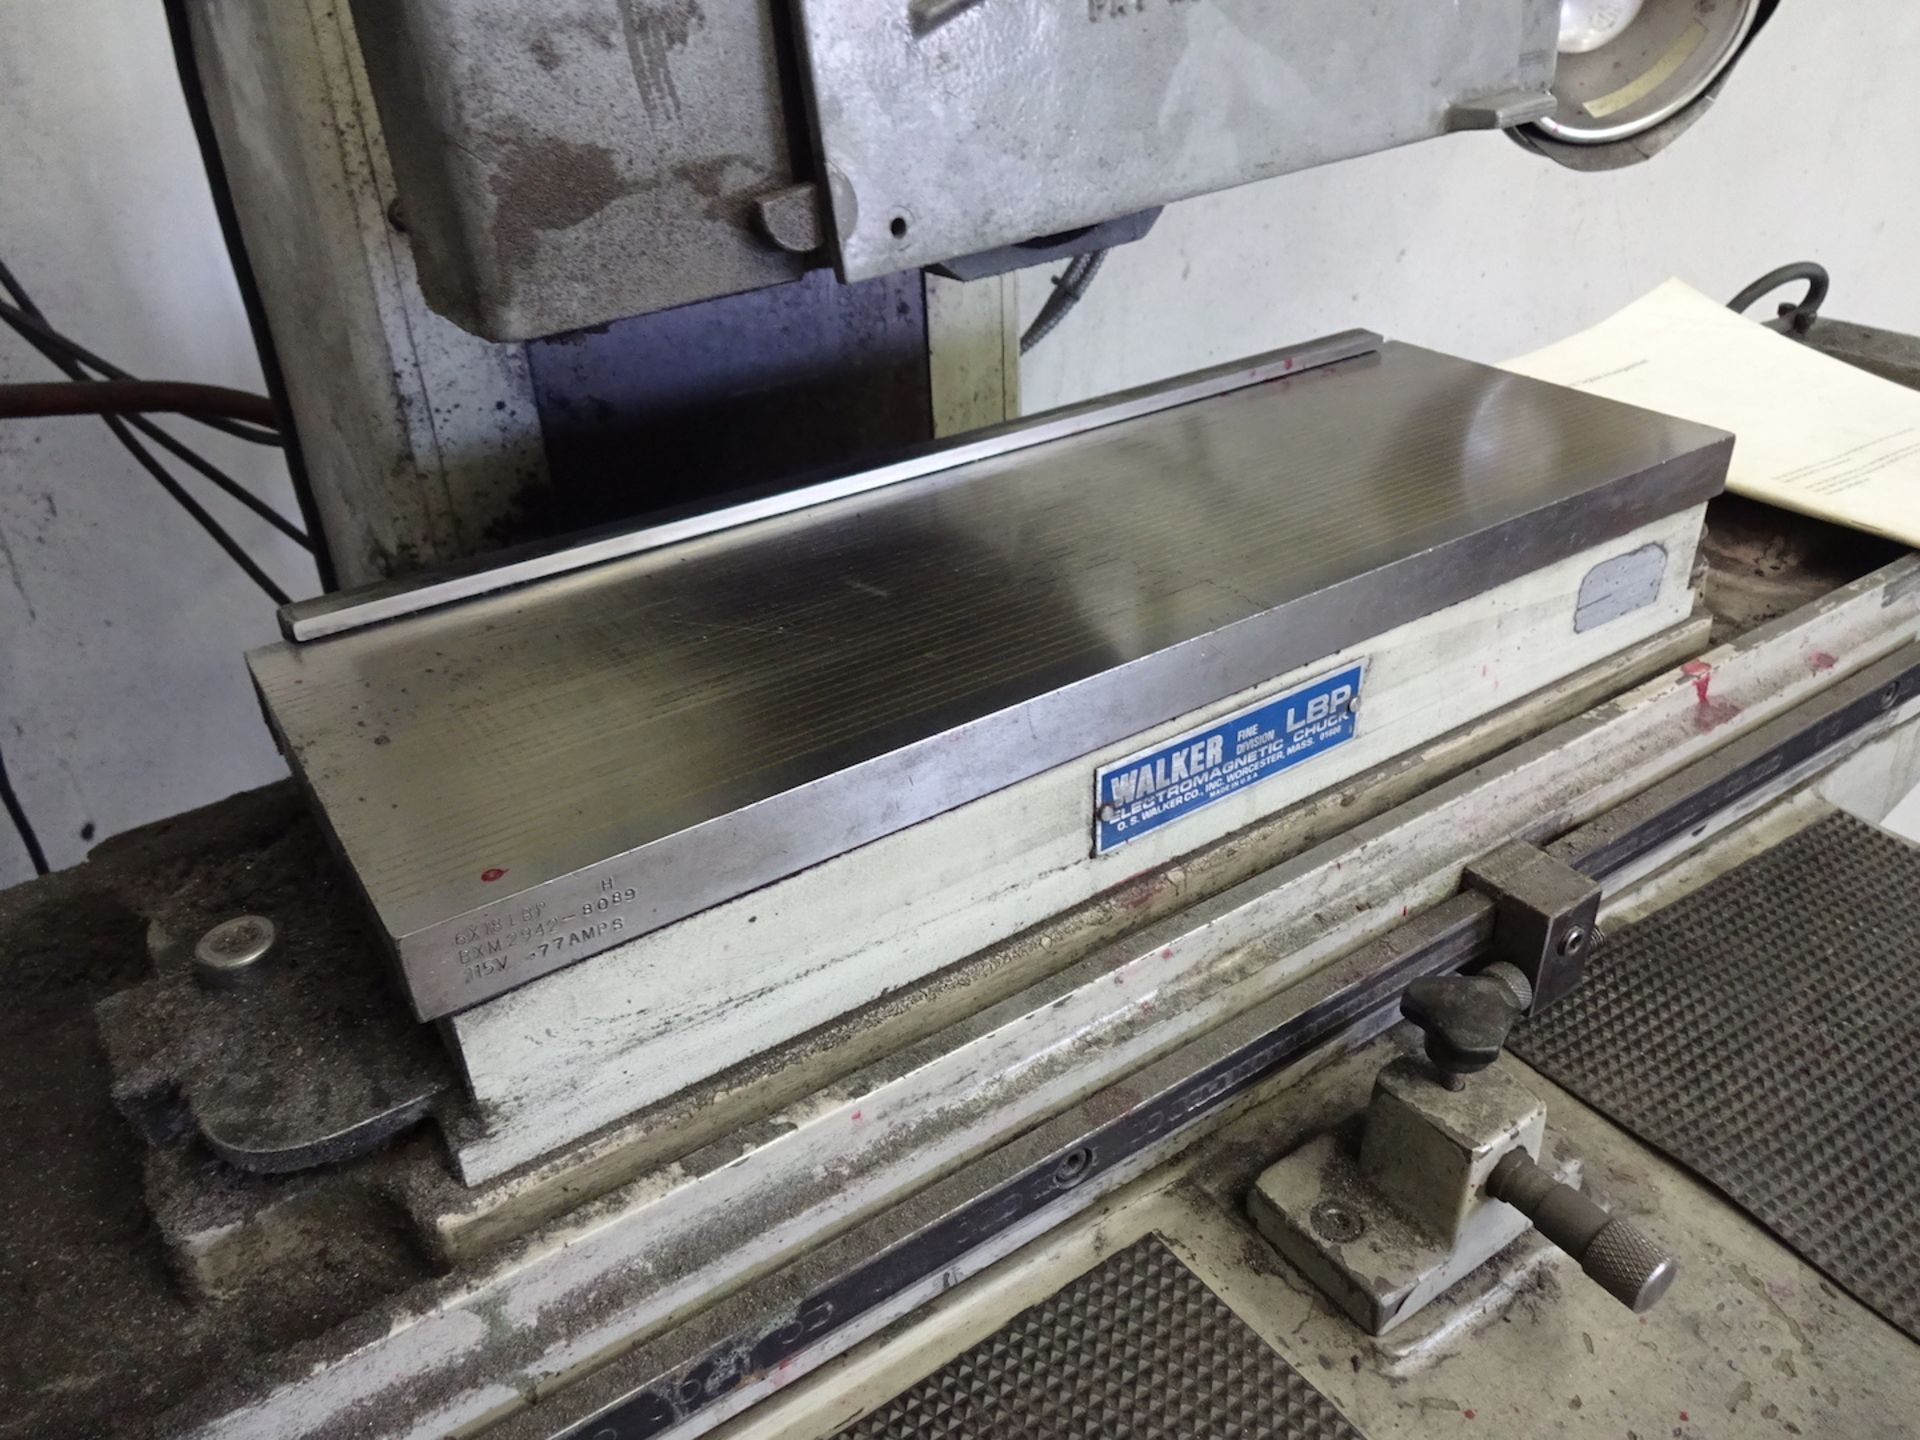 Okamoto 6 in. x 18 in. Model Linear 618 Hand Feed Surface Grinder, S/N 4785, Sony LG10 2-Axis - Image 5 of 6